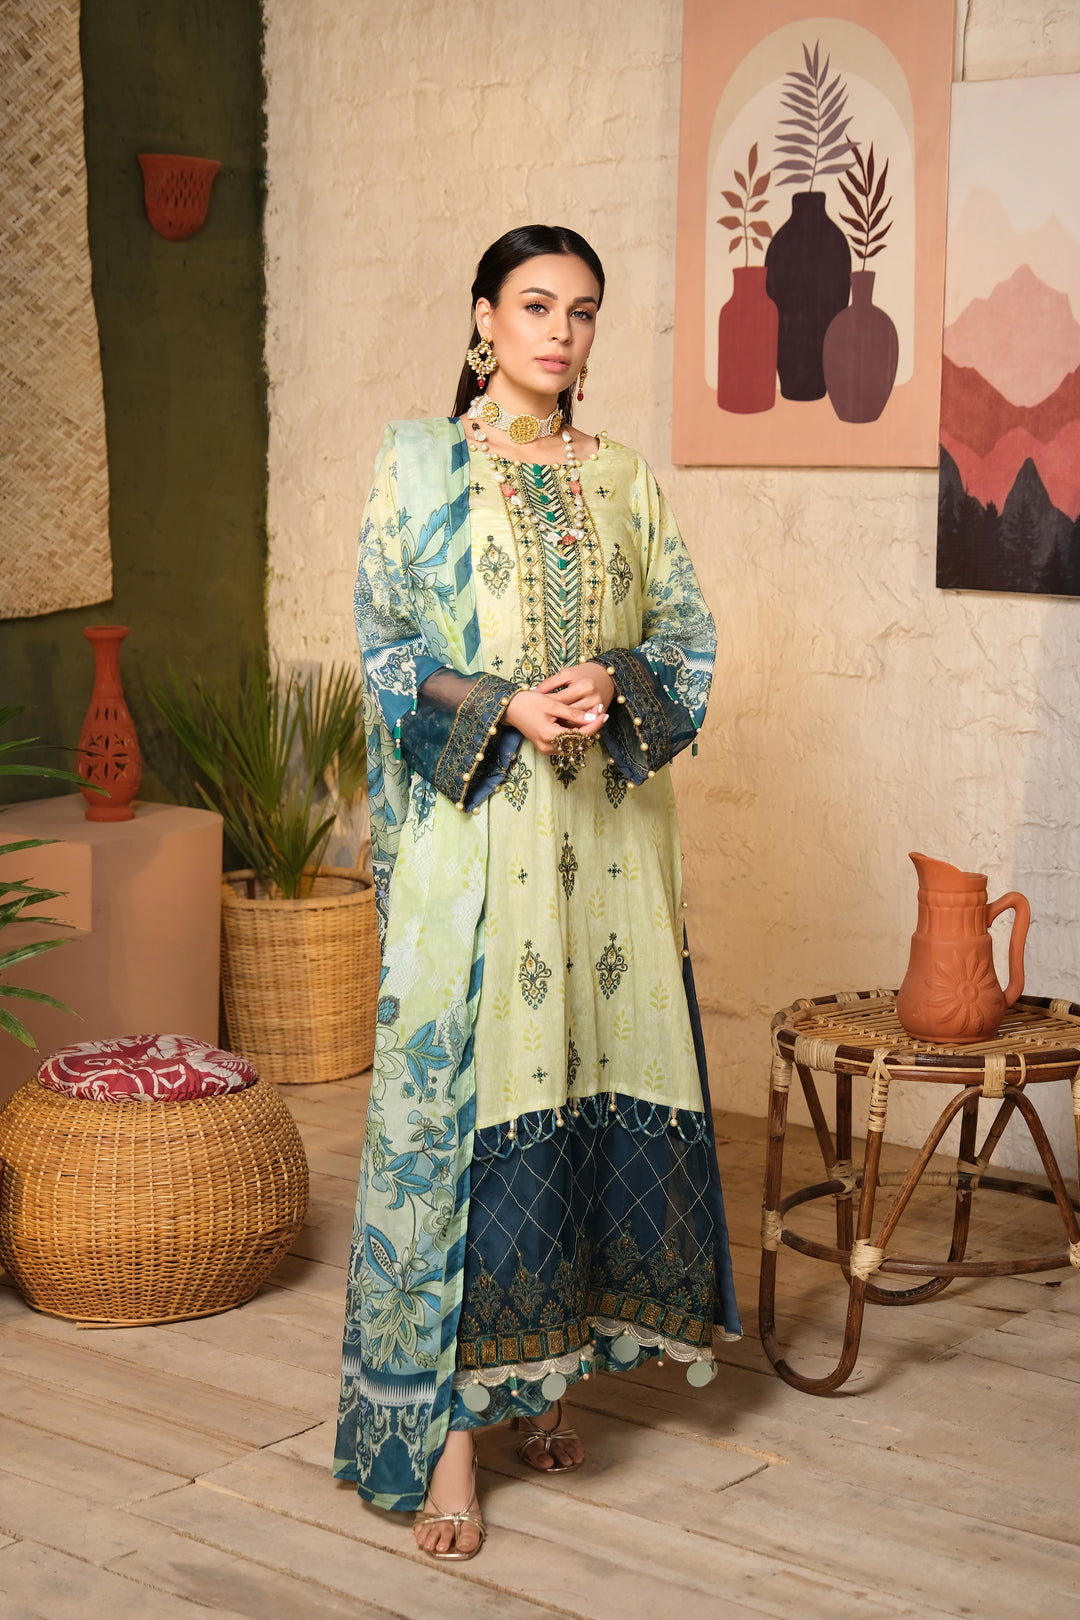 SHAJR-E-ZOUQ COLLECTION / 3PC / EMBROIDERED LAWN UNSTITCHED EID23 COLLECTION BY JACQUARD CLOTHING